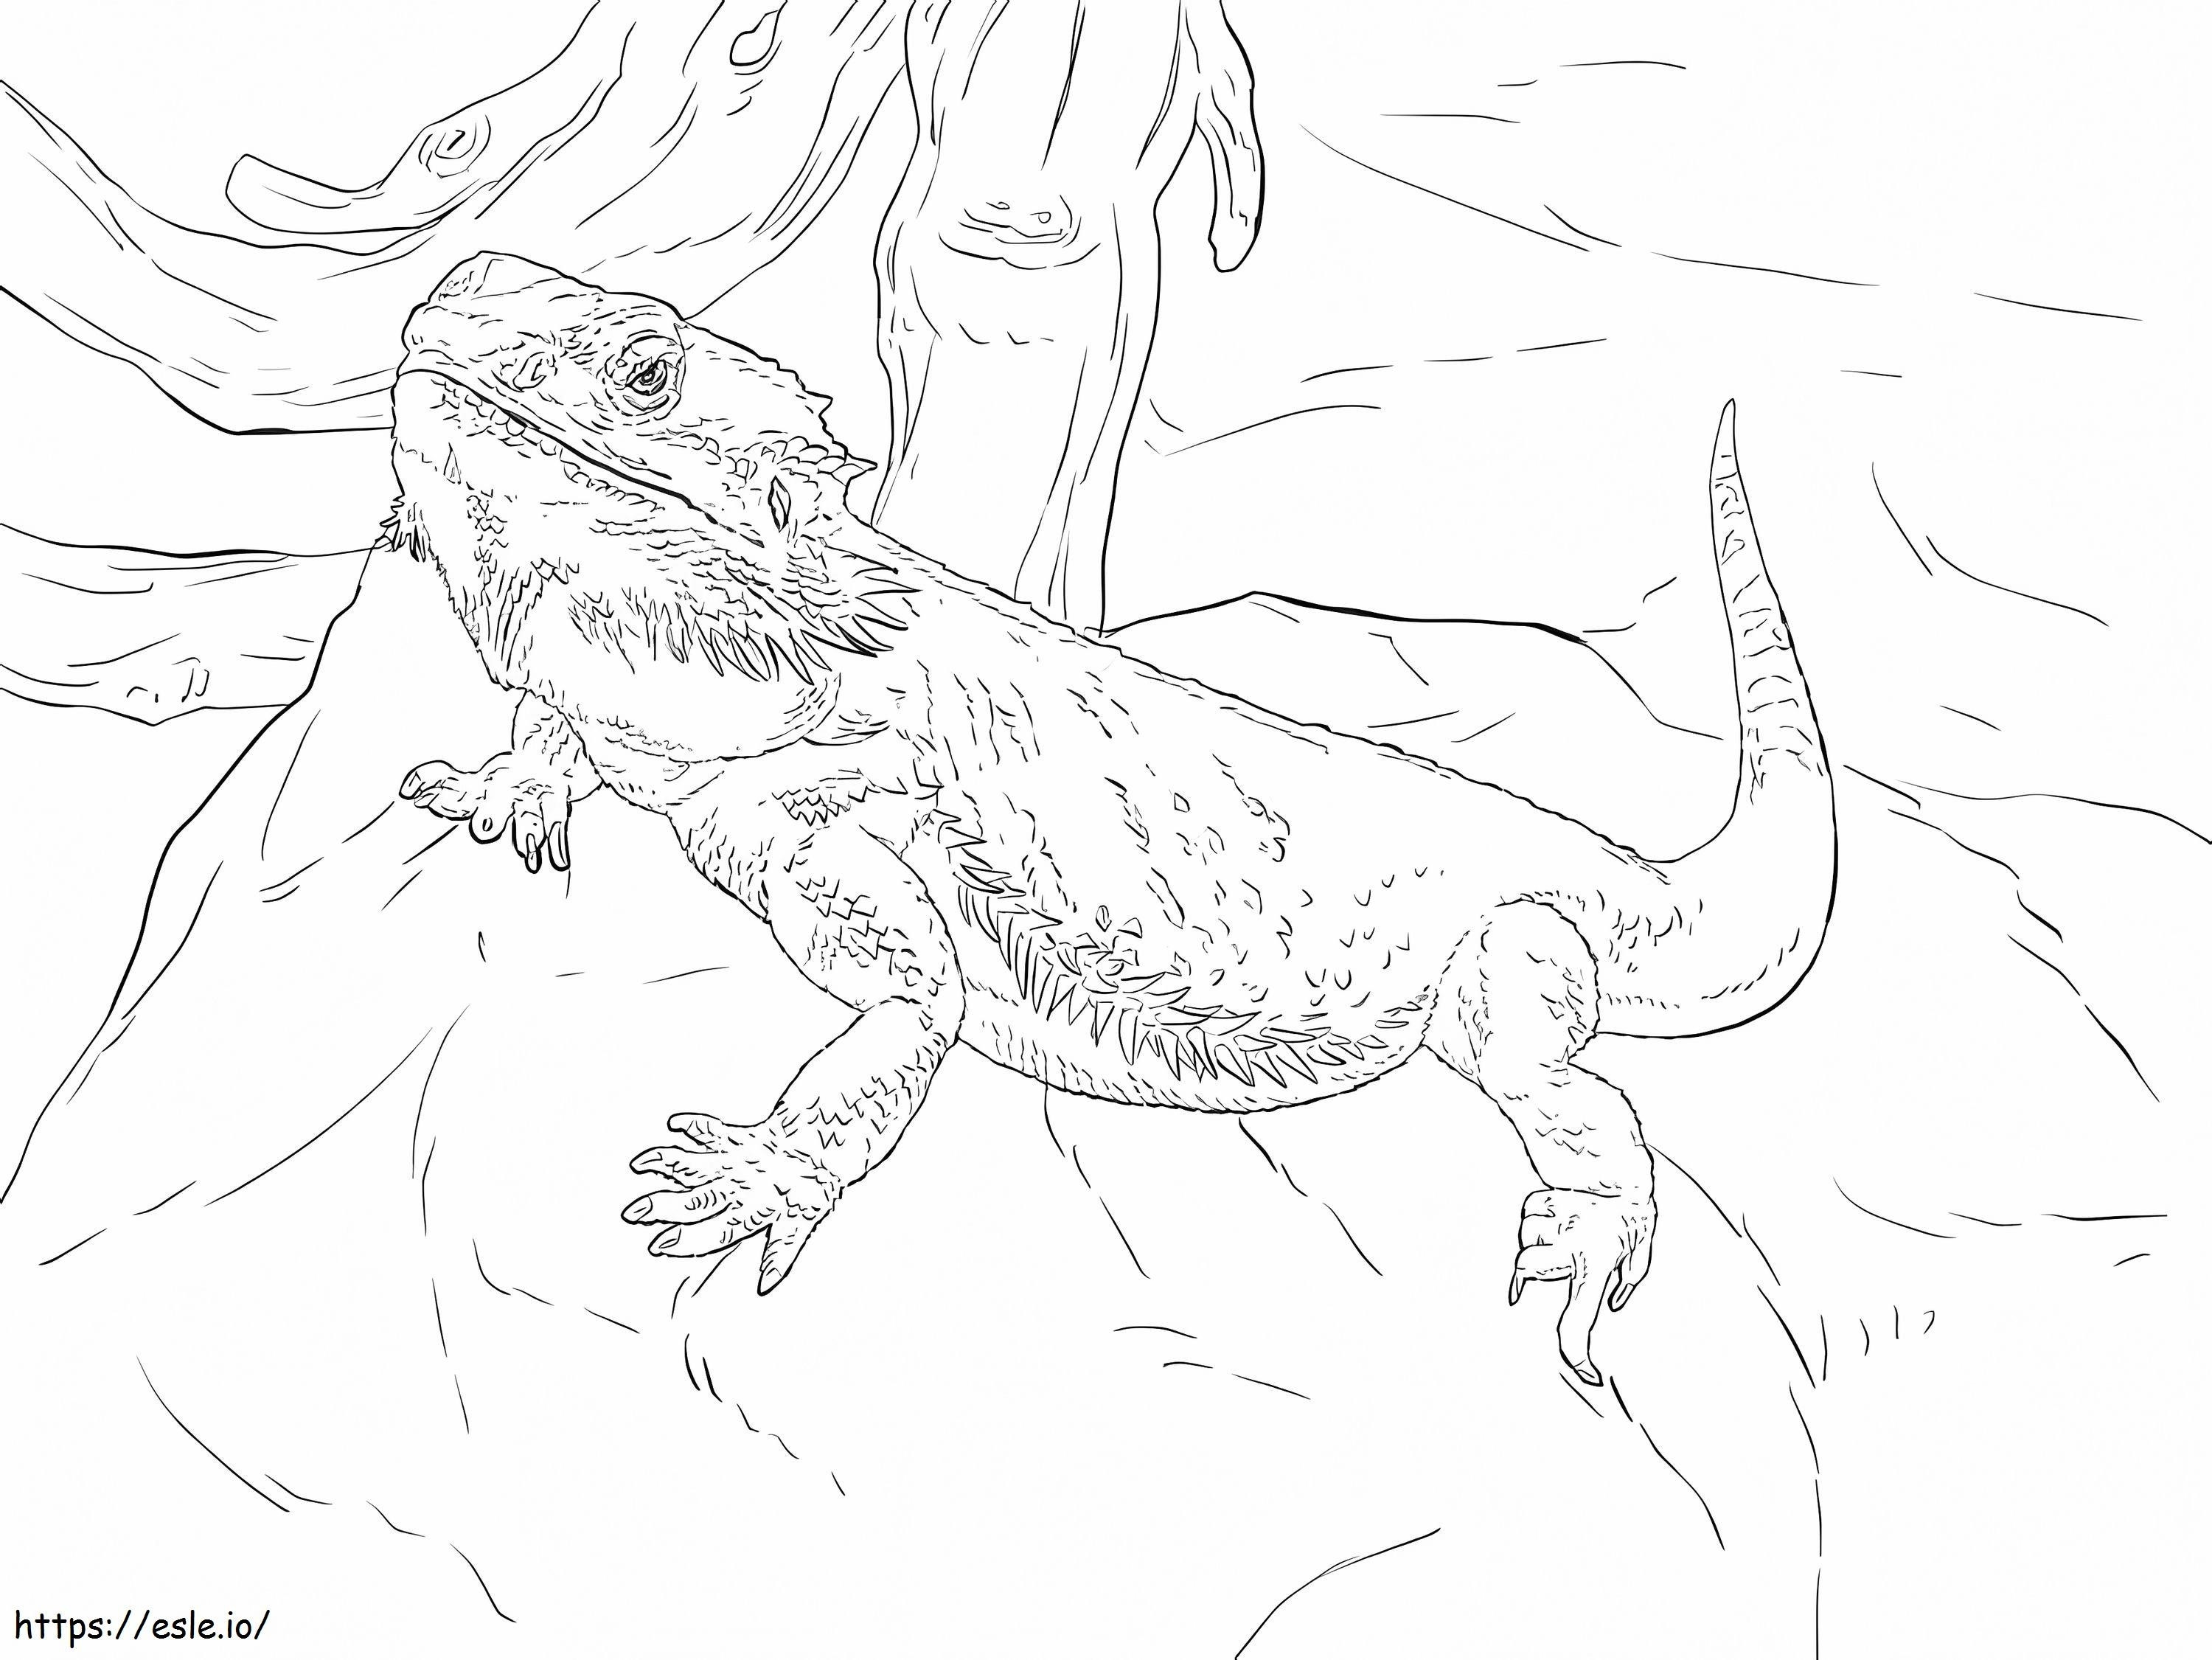 Central Bearded Dragon coloring page